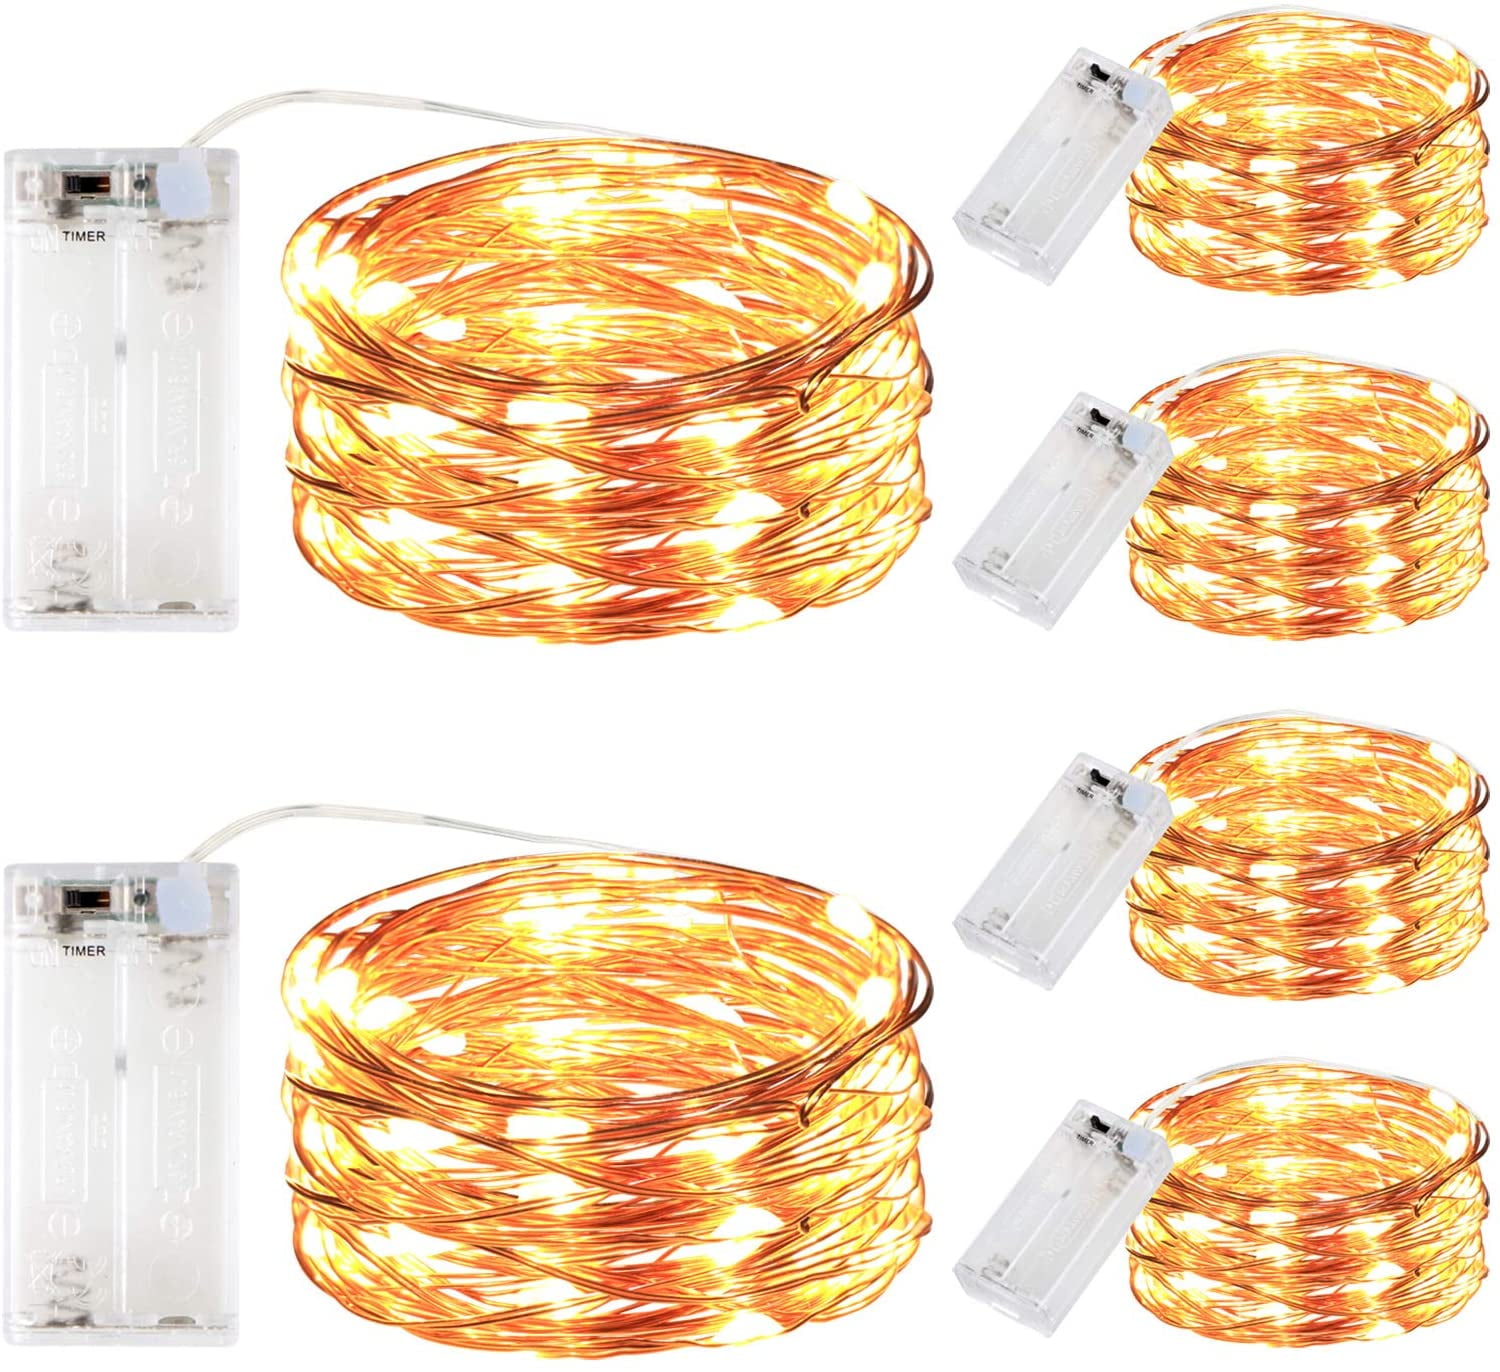 6 Pack Led Fairy String Lights Battery Operated With Timer 10ft 30leds Battery Powered Copper